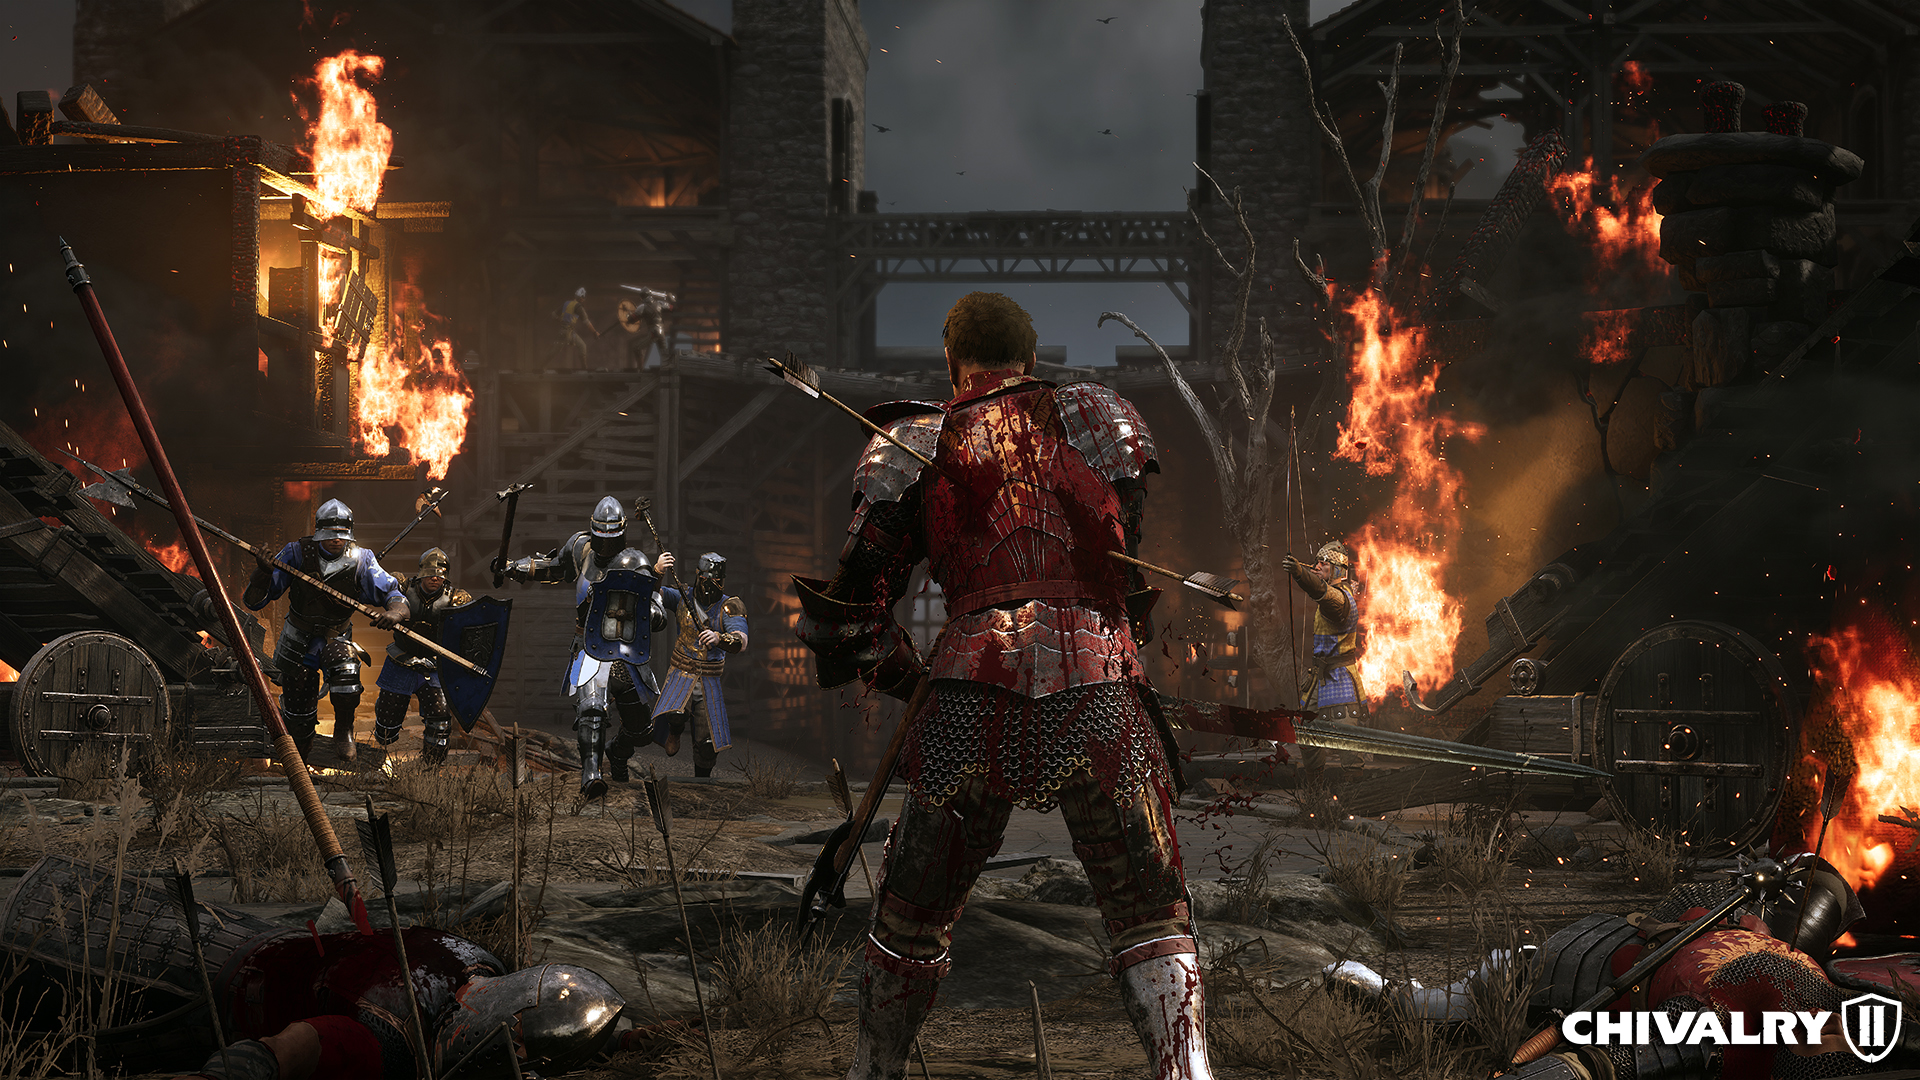 download chivalry 2 price for free